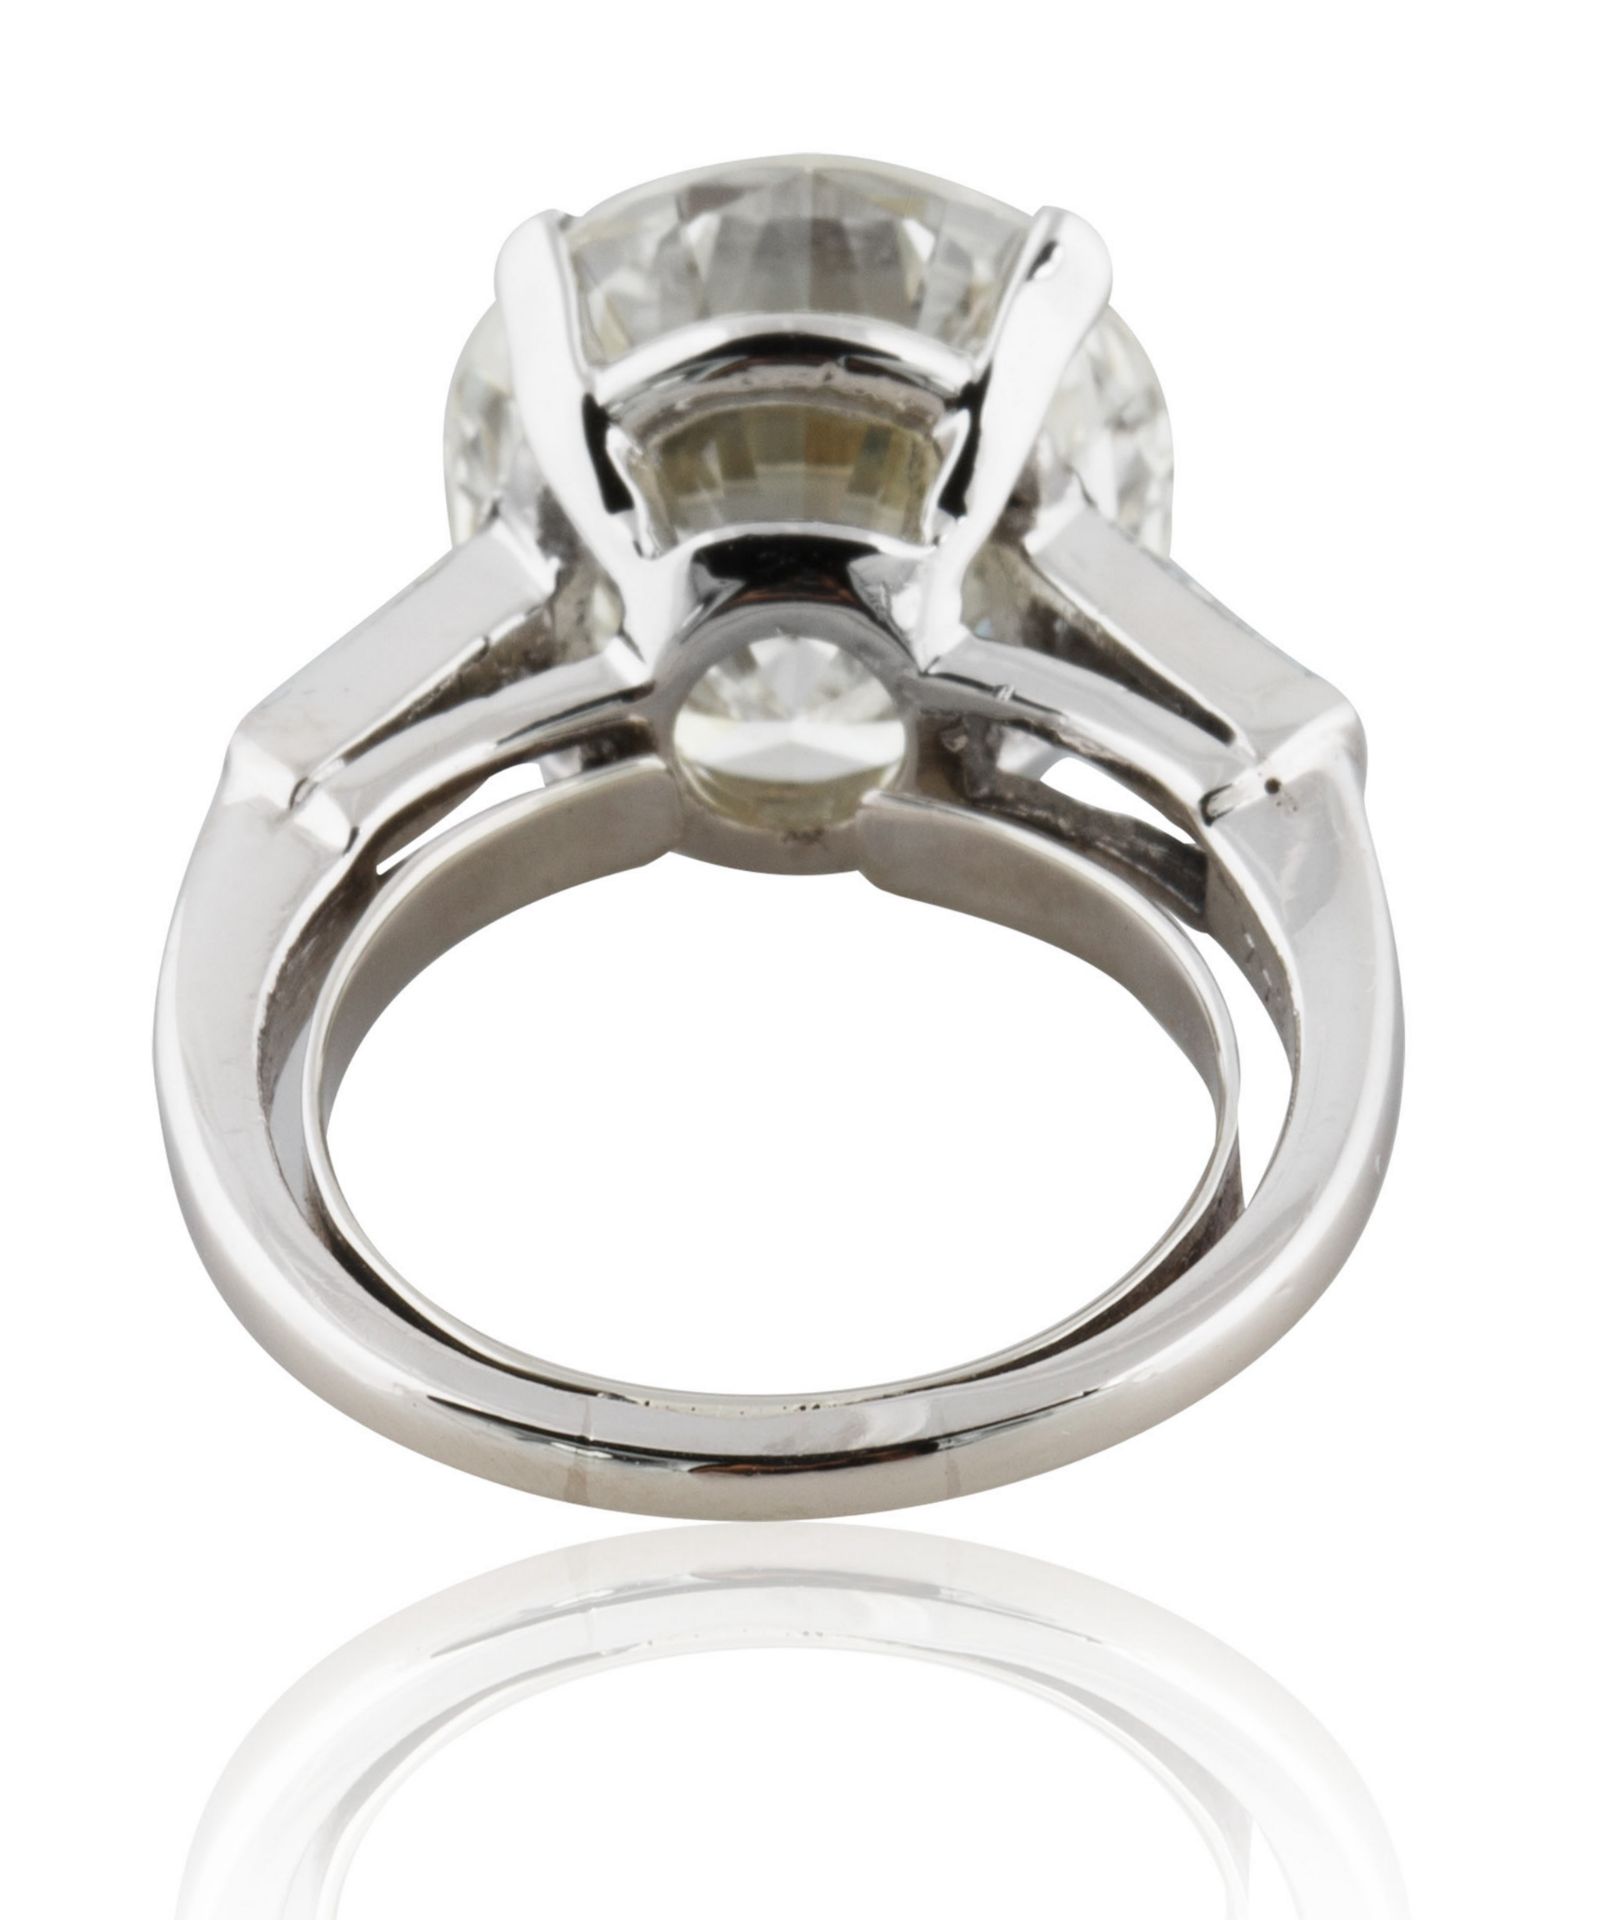 A 7.36 CT ROUND BRILLIANT AND TRAPEZOID DIAMOND RING - Image 3 of 6